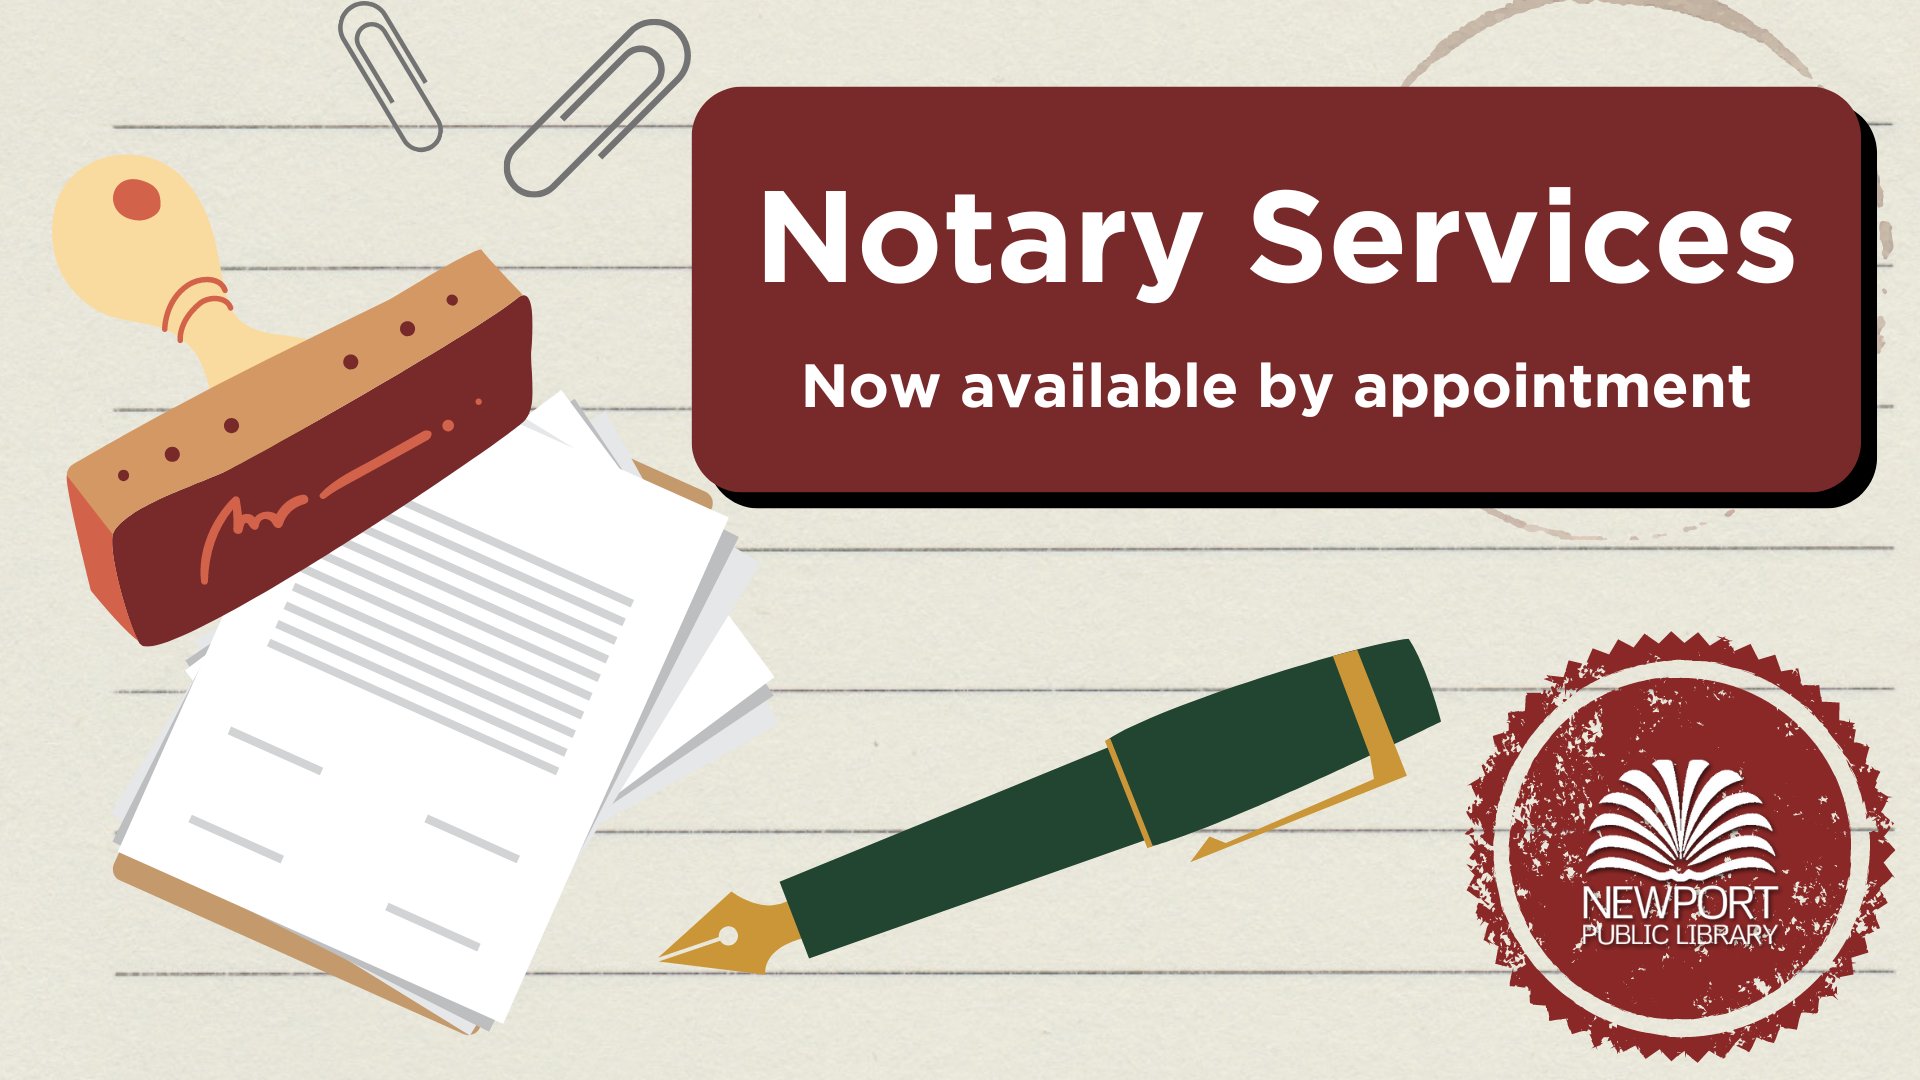 Notary Services Now Available